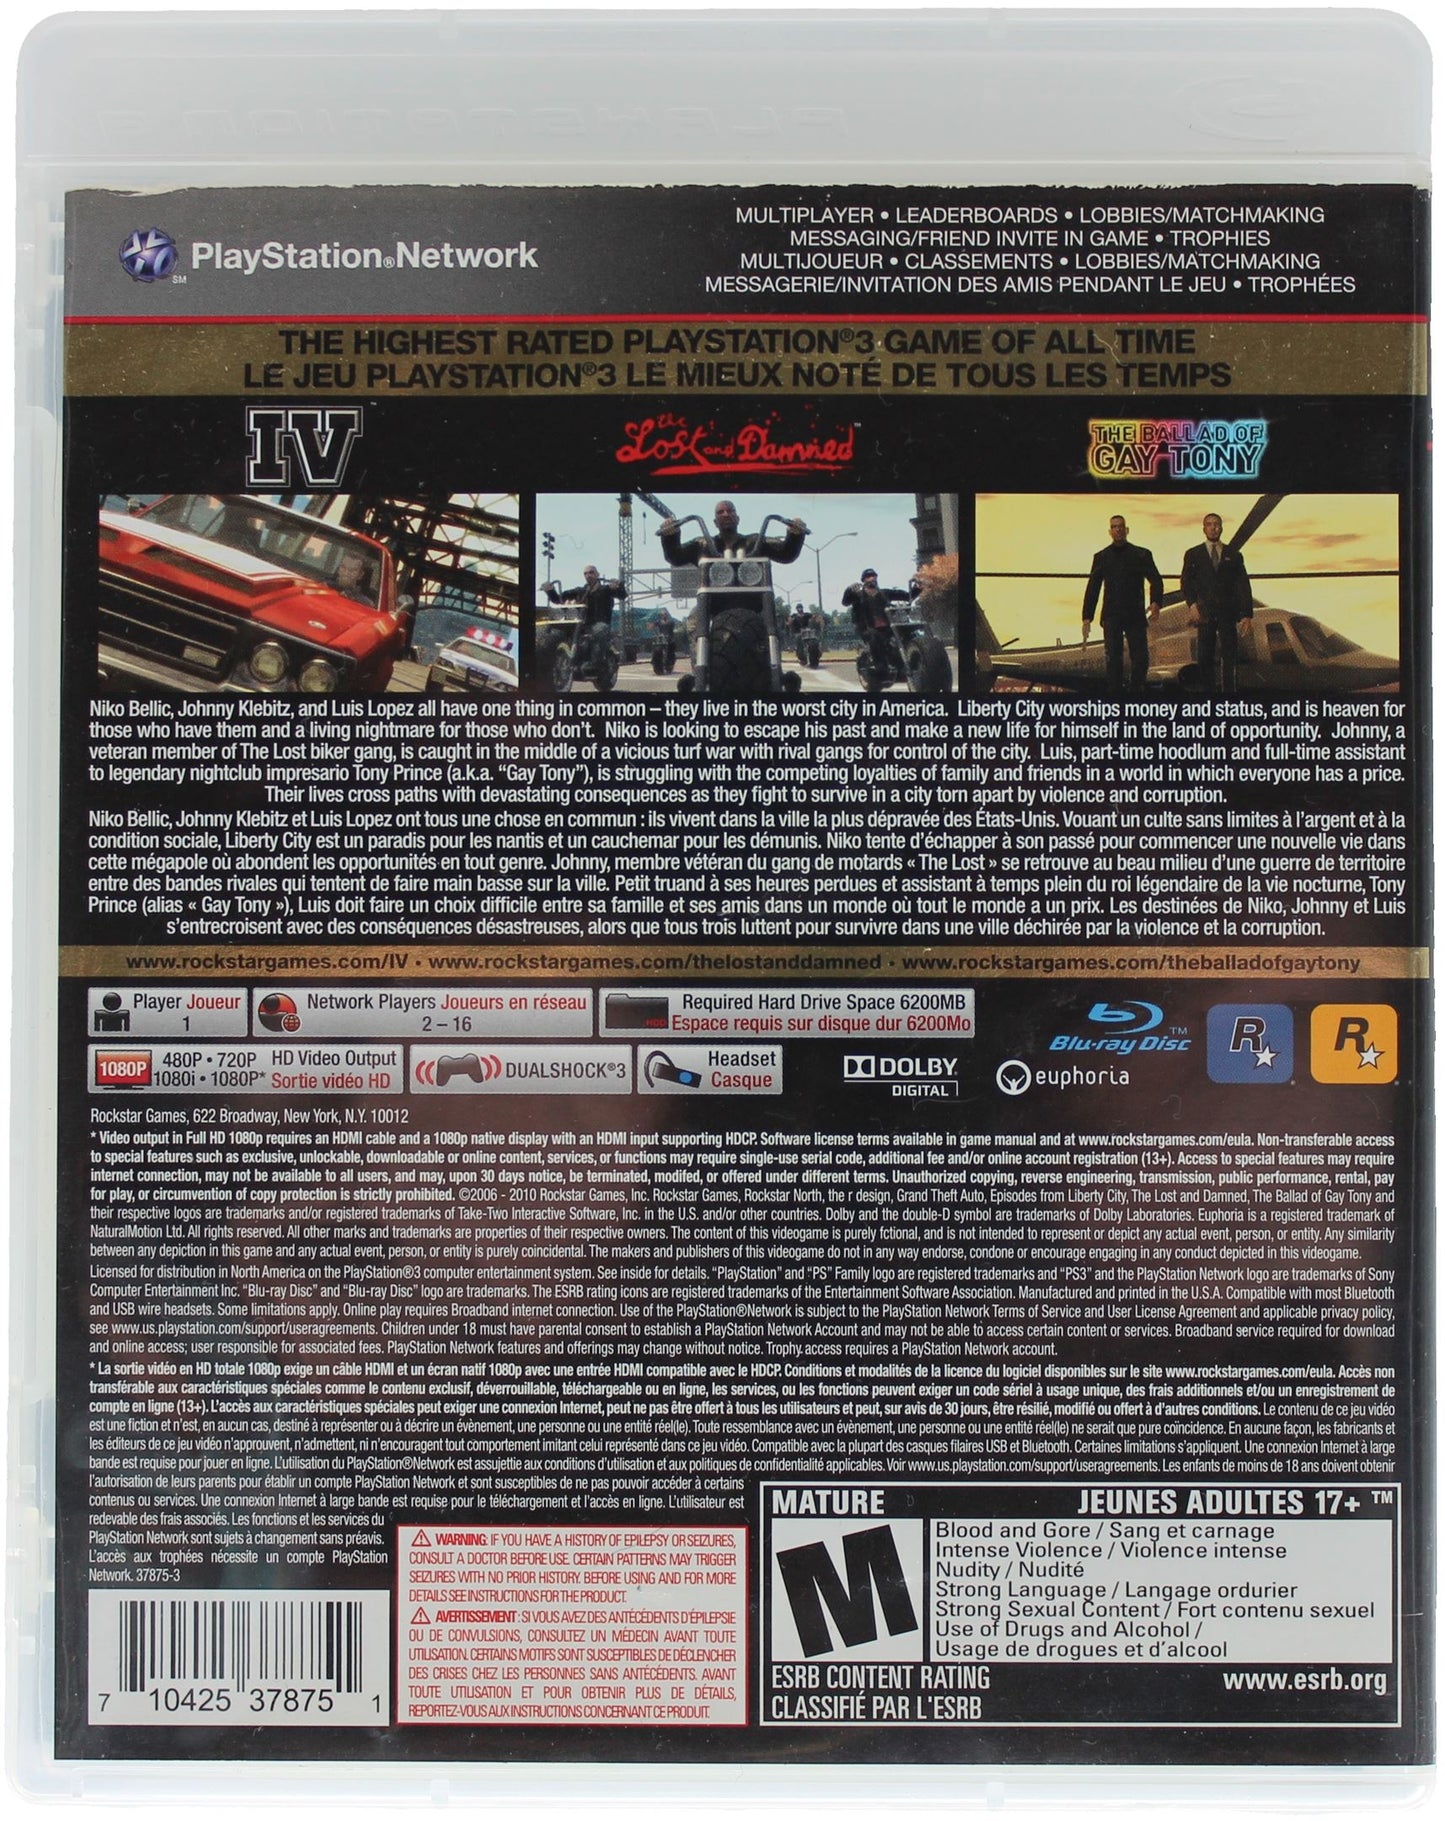 Grand Theft Auto IV [The Complete Edition]